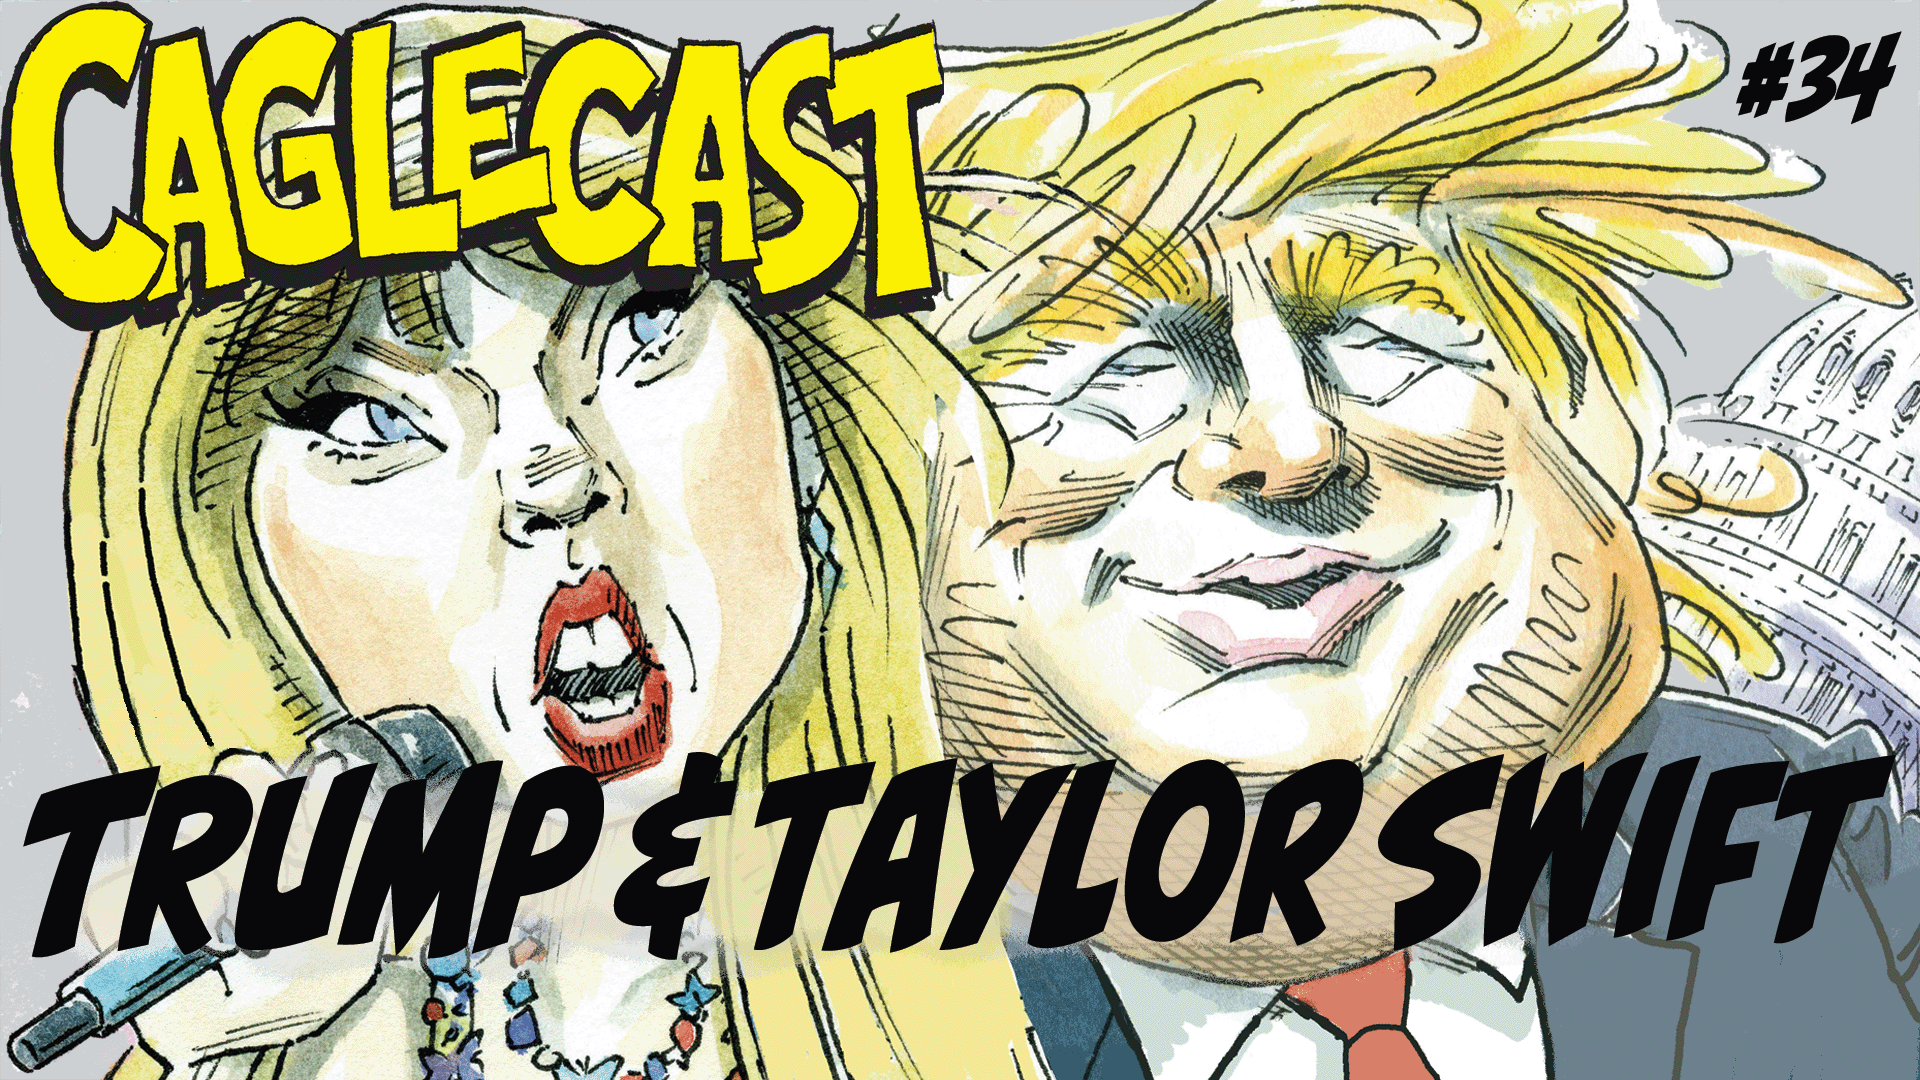 Taylor Swift and Donald Trump --Together at Last! poster